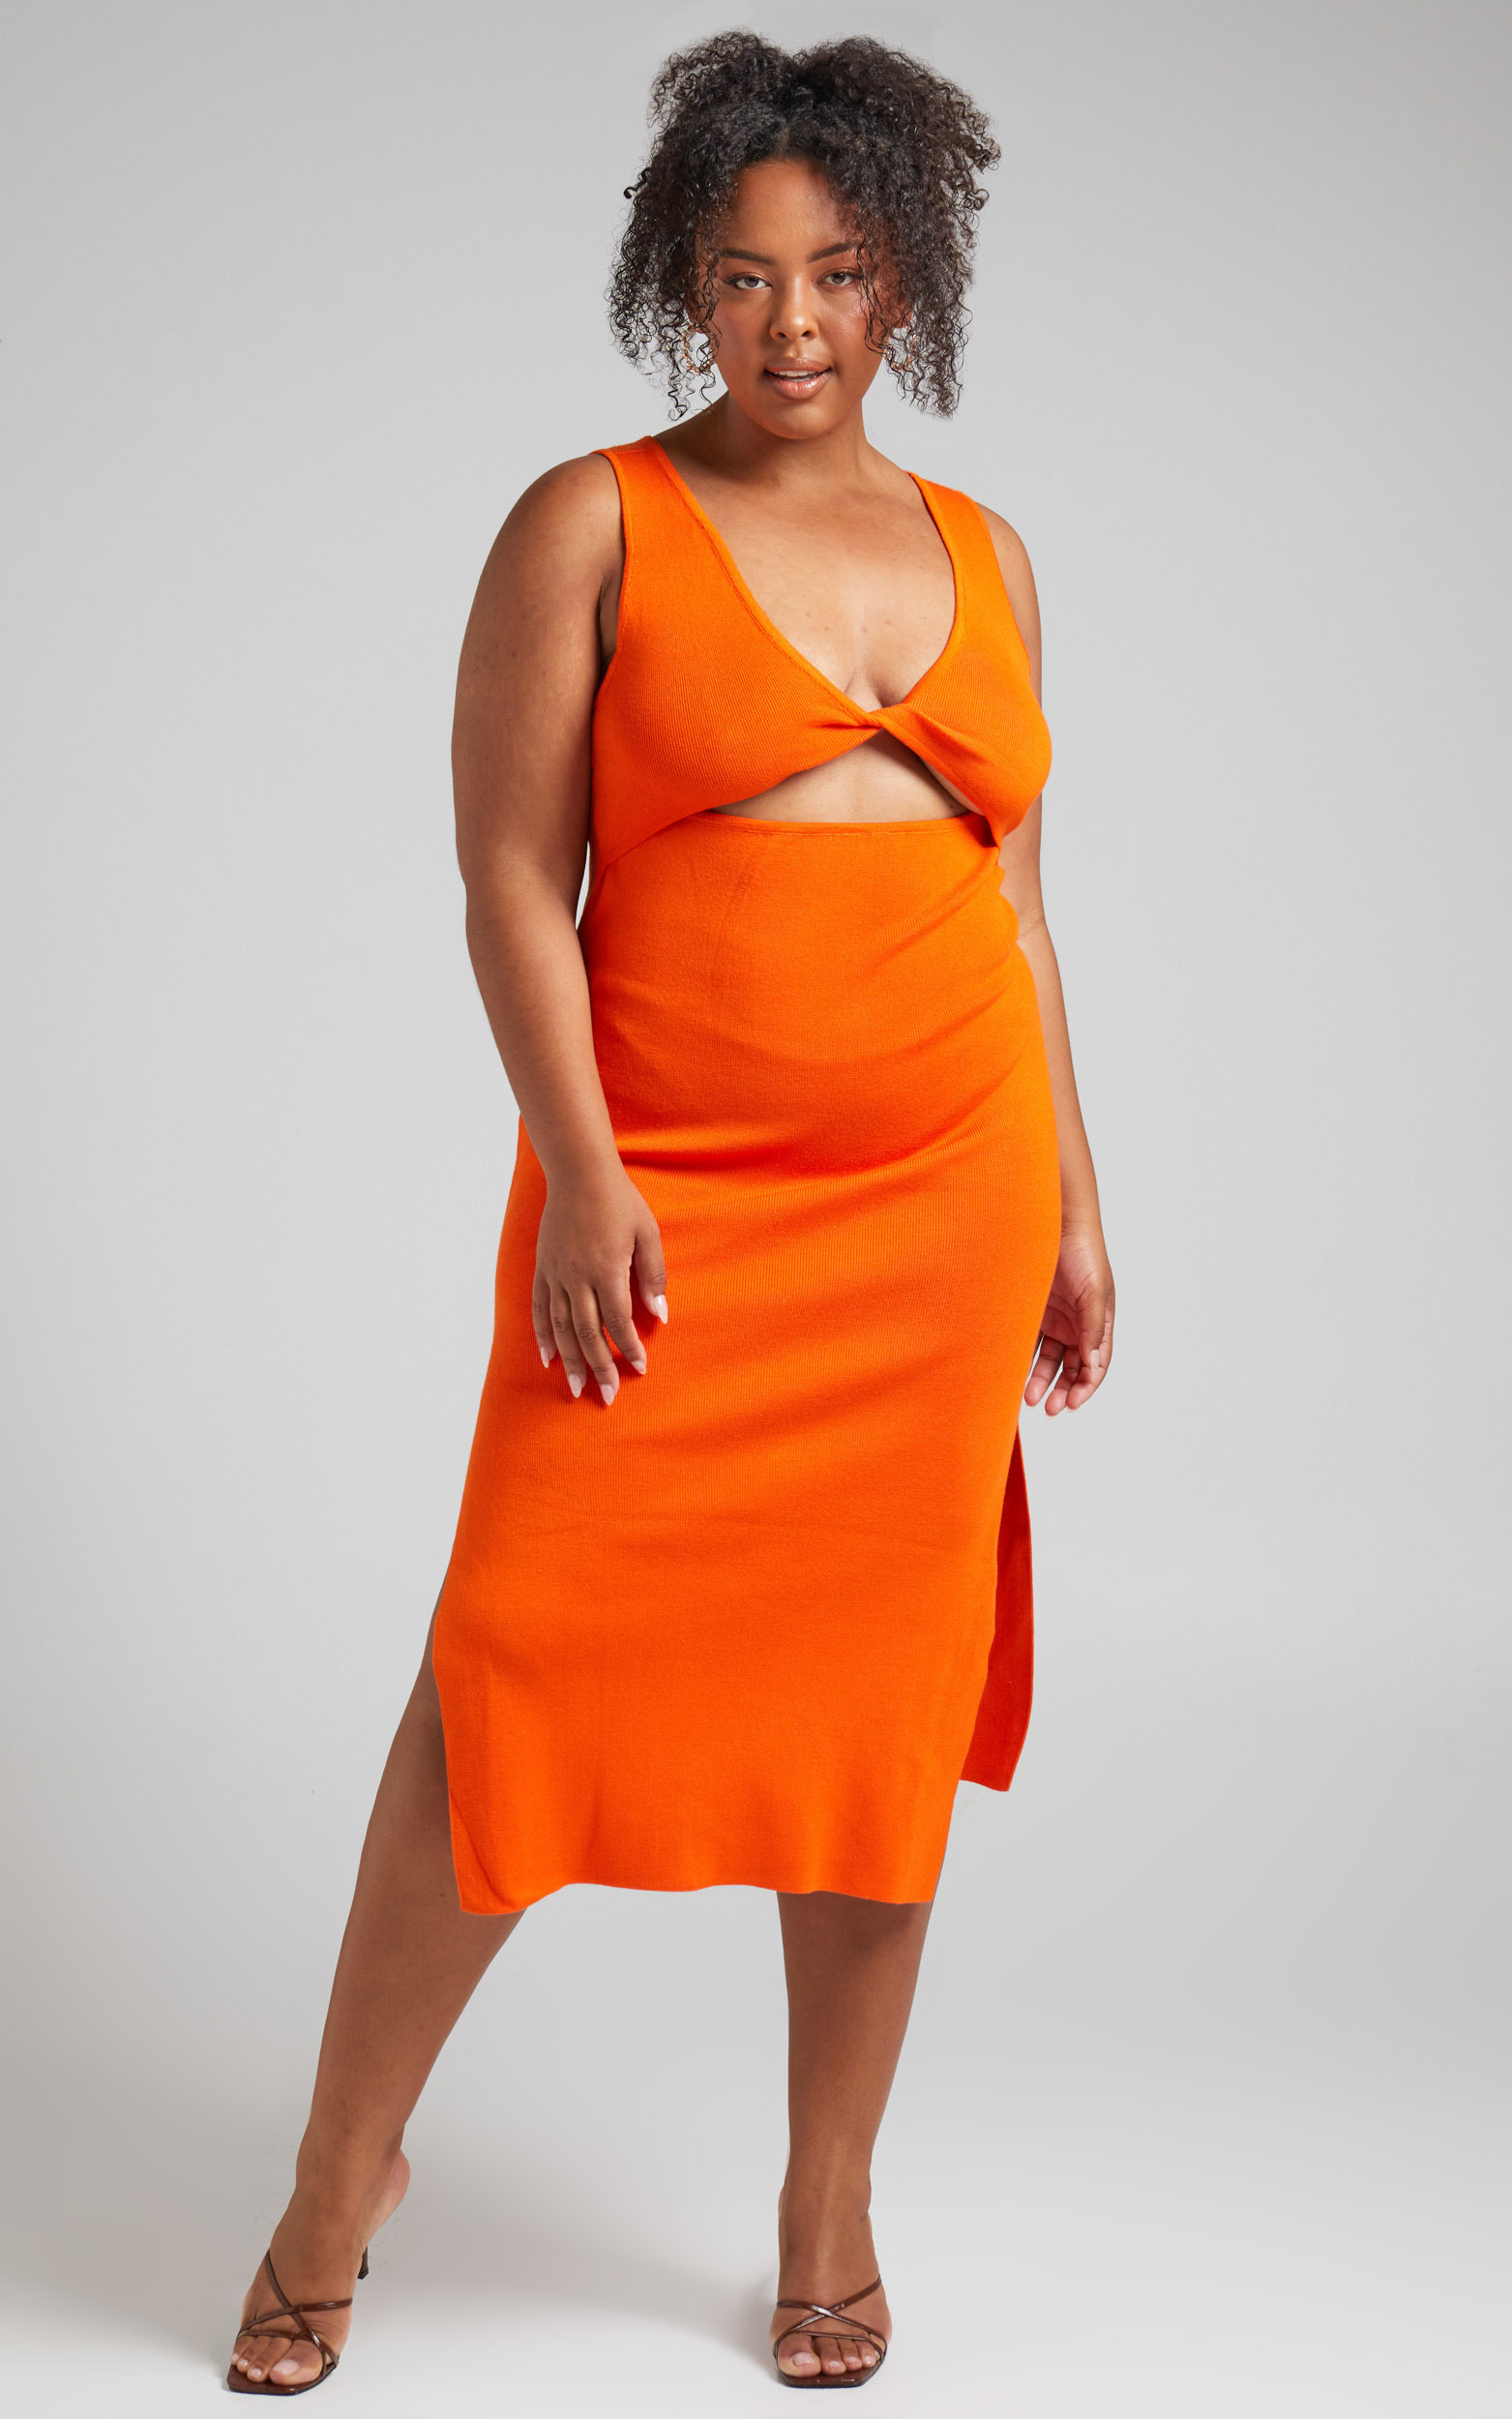 Calithea Knit Dress with Twist Front in Orange - 04, ORG1, hi-res image number null